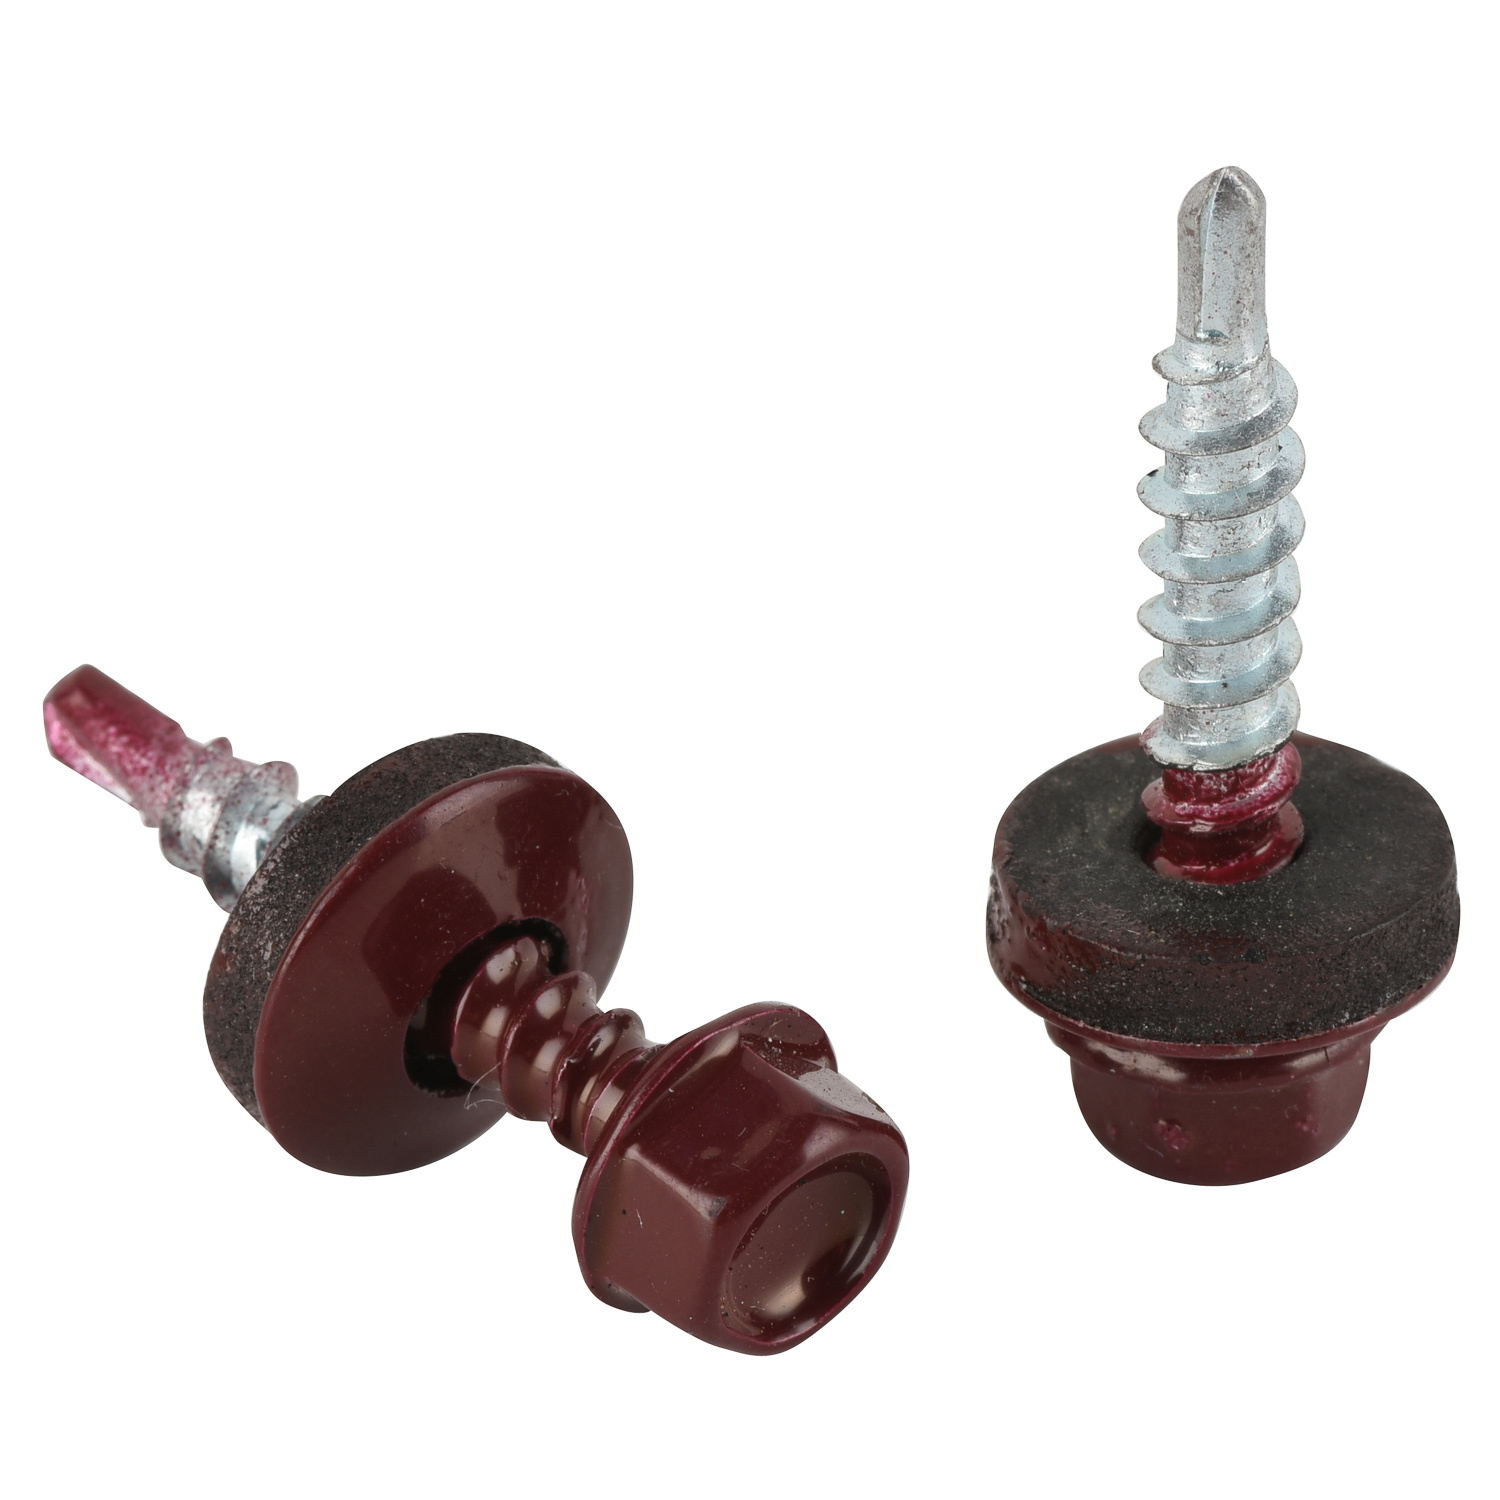 Hexagonal Washer Head Self-Drilling Screws with Steel &Rubber Washer